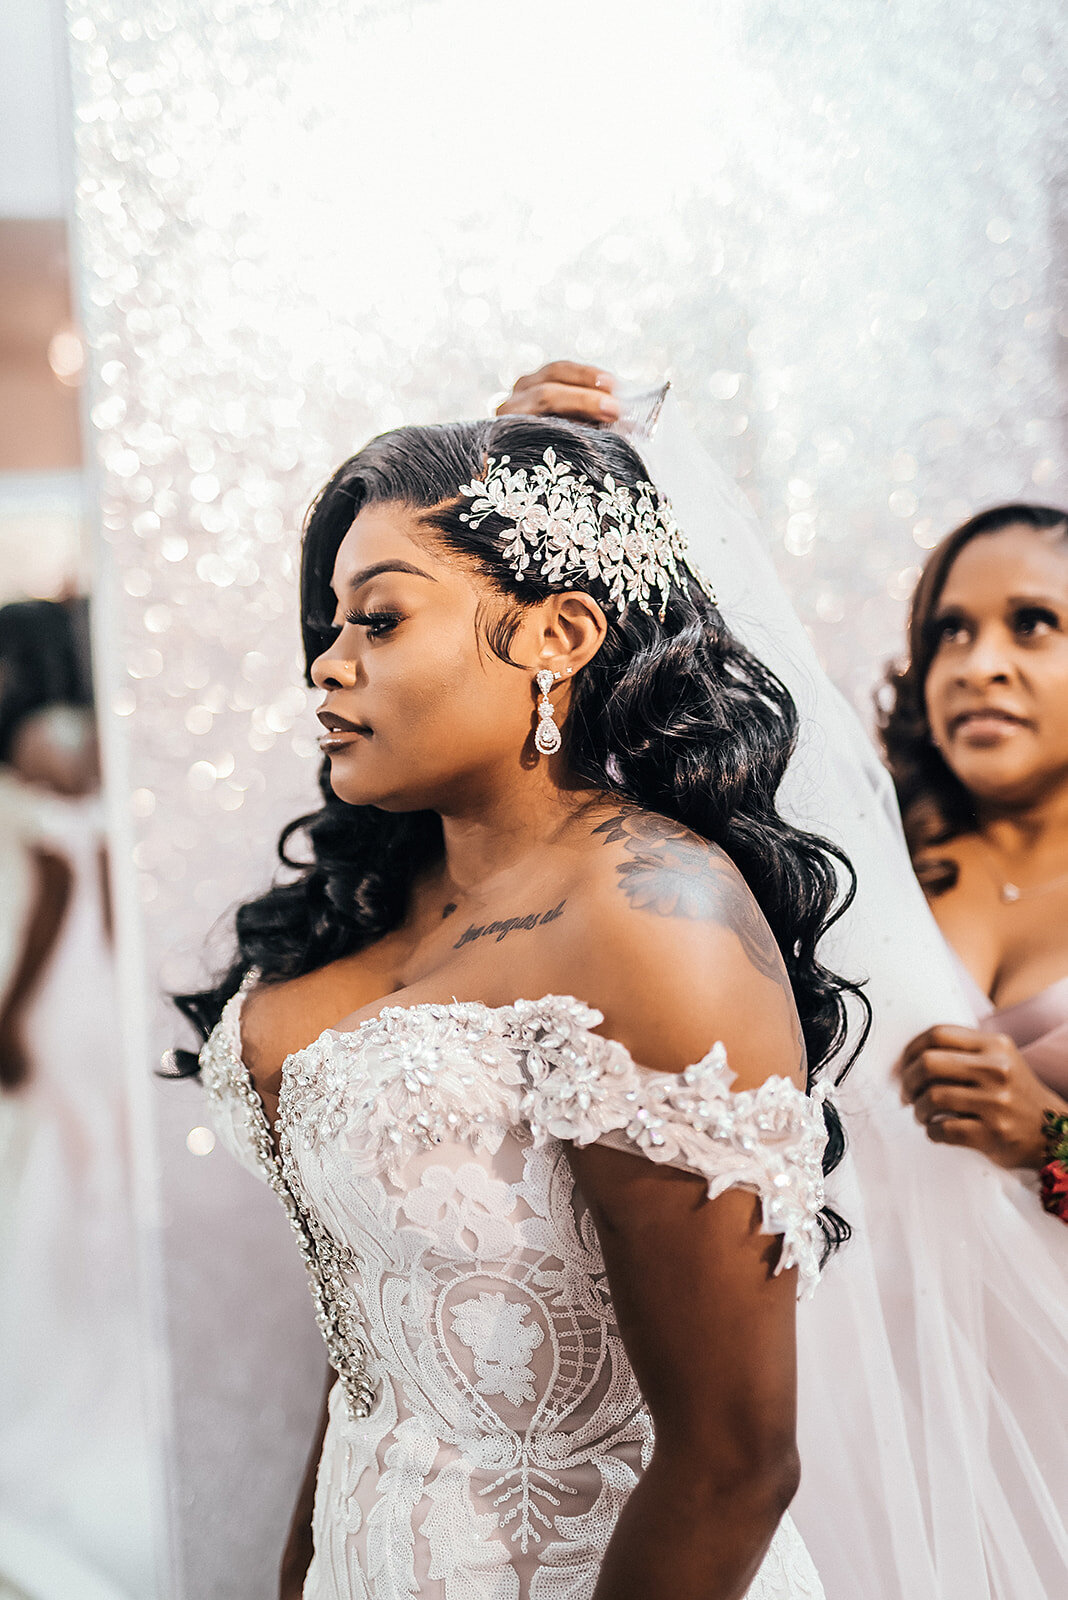 Beautiful Bride with long hair getting ready with her bridesmaids